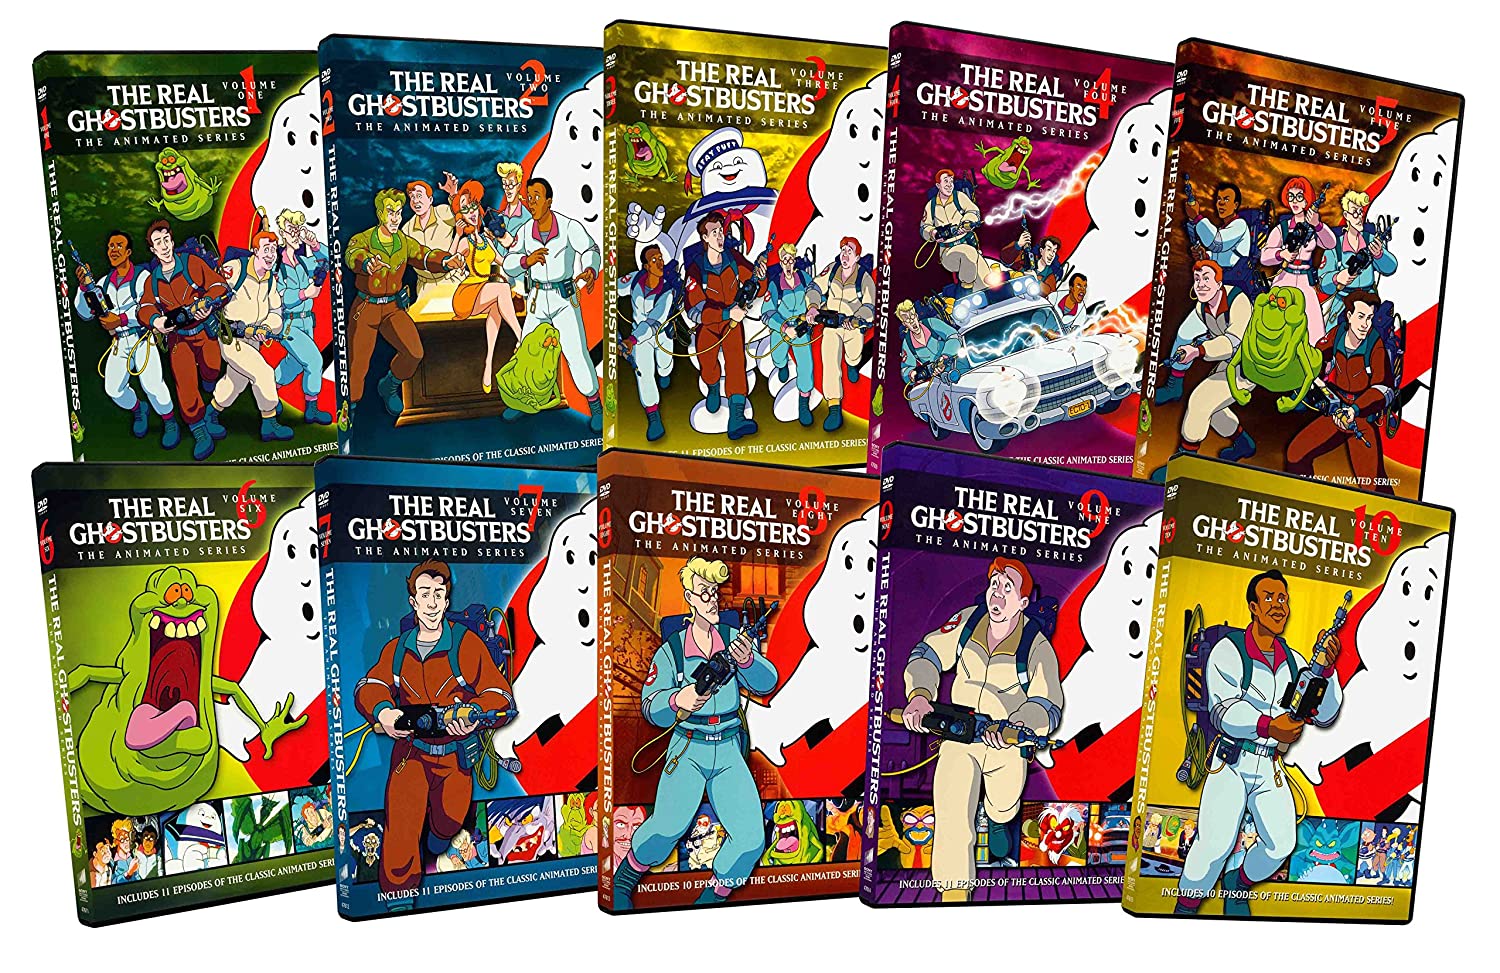 The Real Ghostbusters DVD set single volume packaging